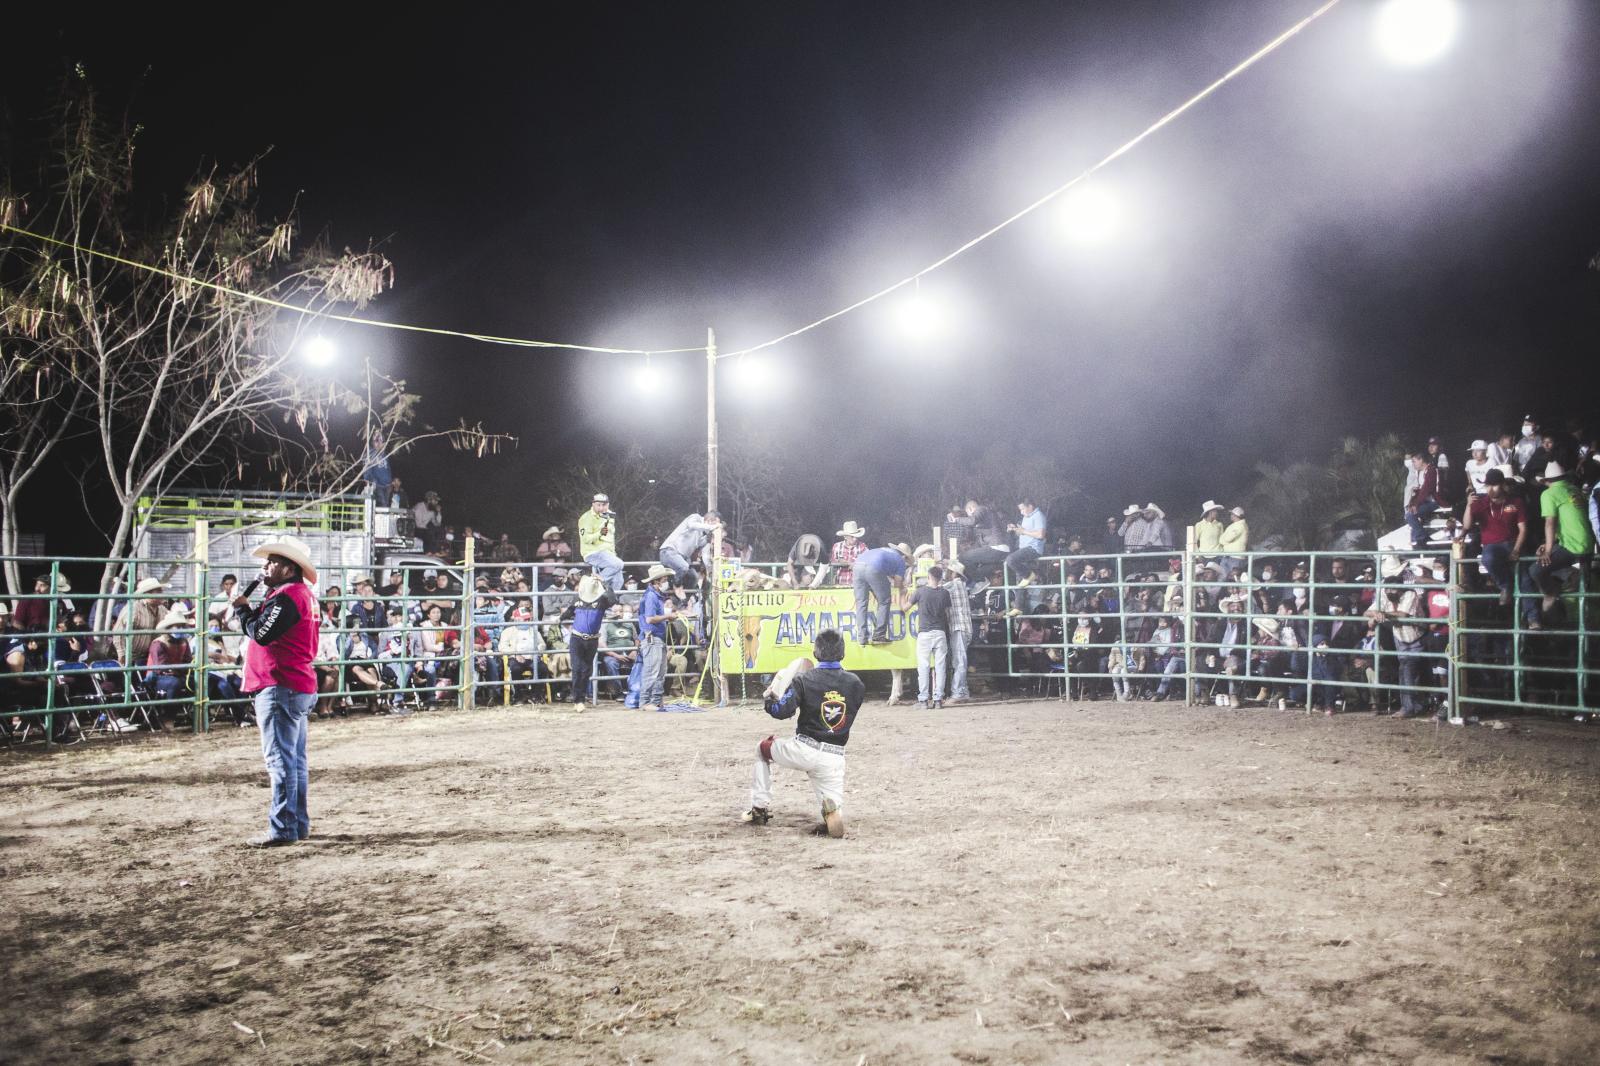 Jaripeo migrante, the FMX group organized the fair of the first section of Tehuitzingo, Puebla,...